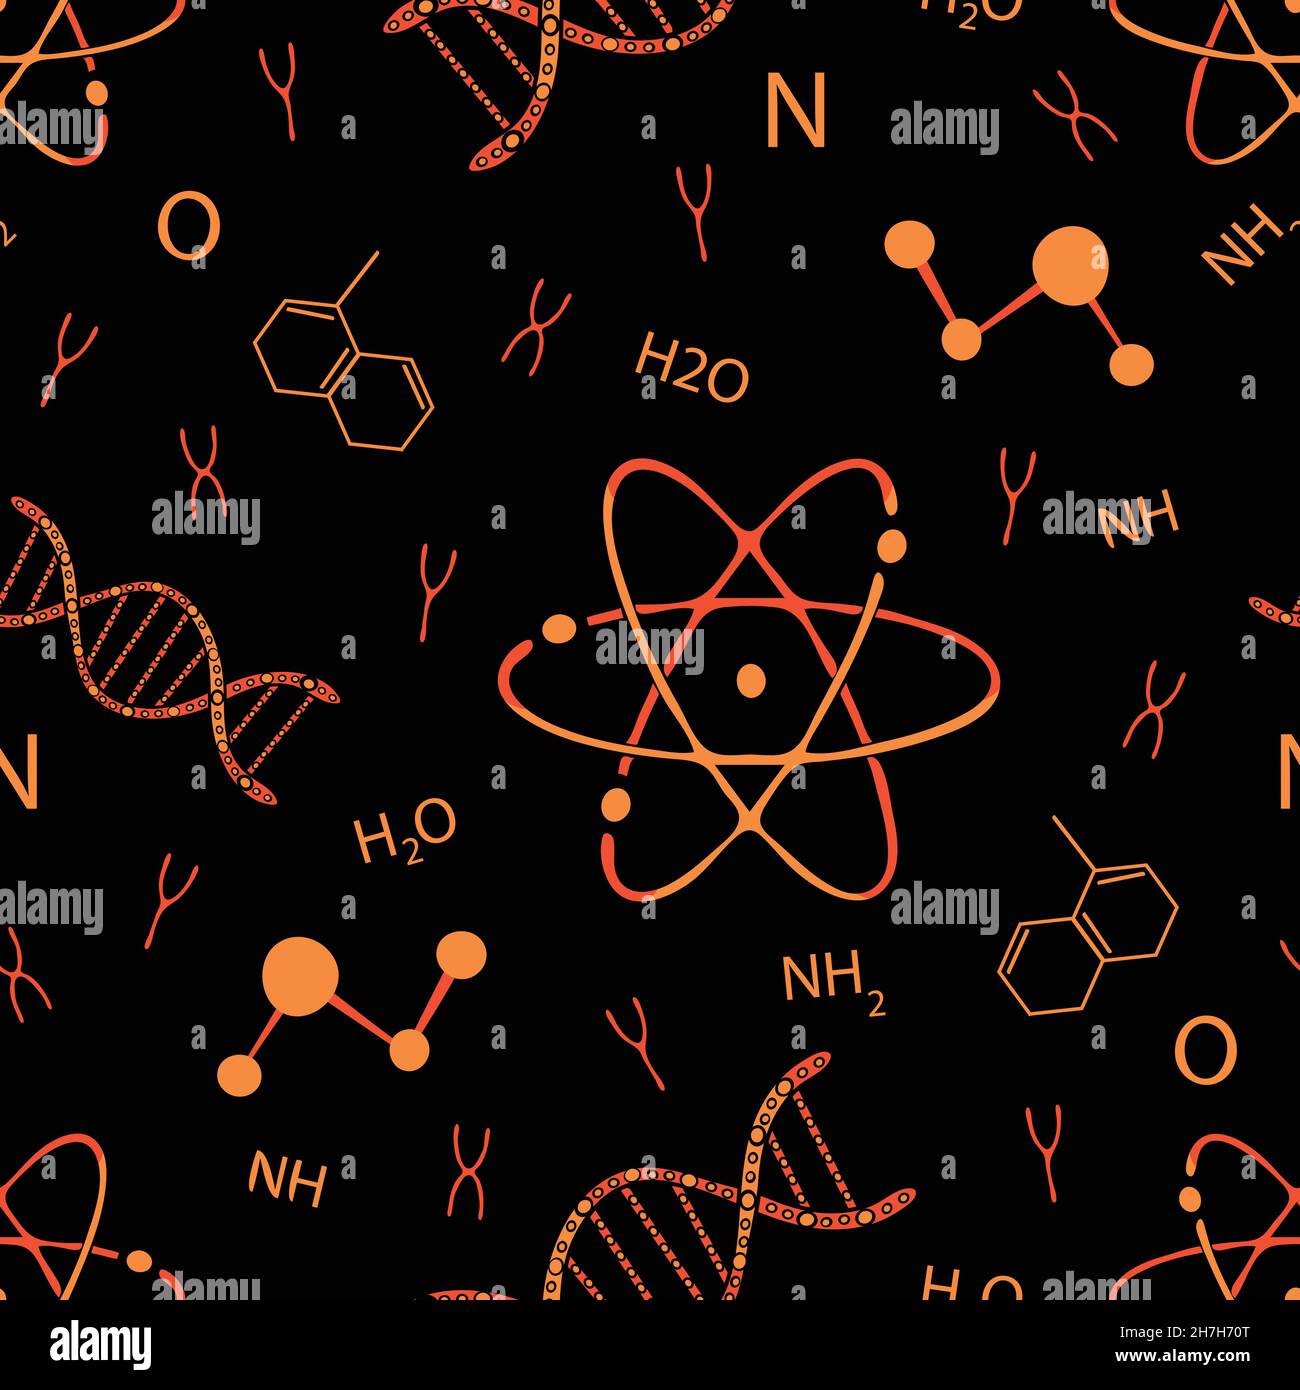 Download Atom wallpapers for mobile phone free Atom HD pictures